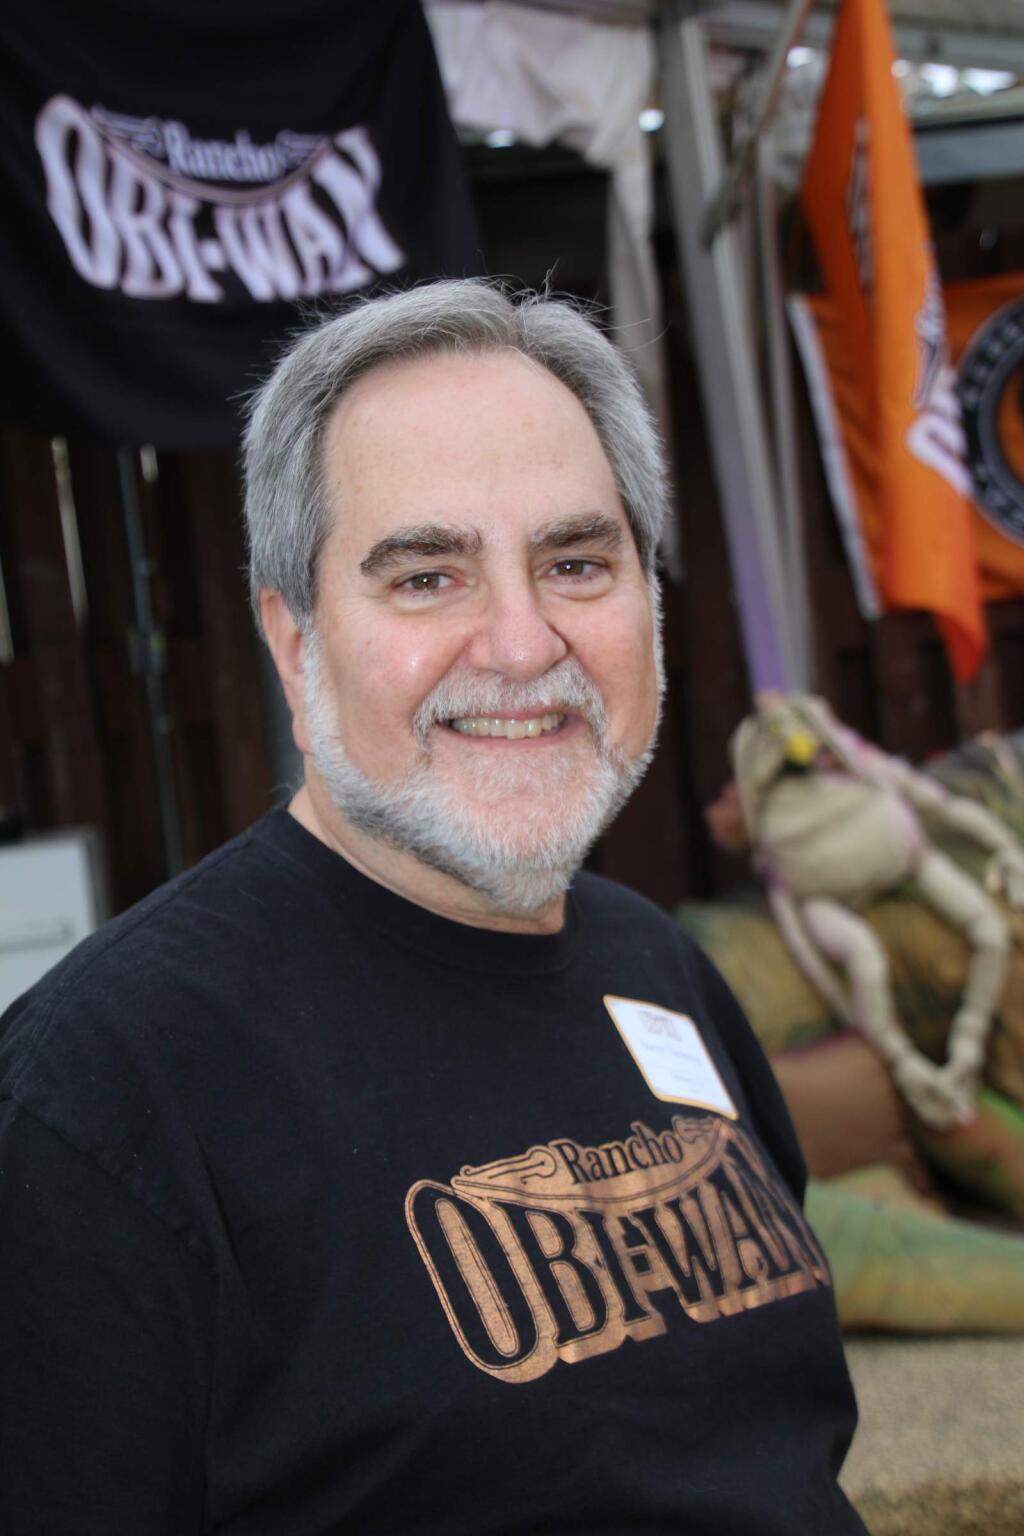 Rancho founder, Steve Sansweet, at the Rancho Obi-Wan May 3rd for Star Wars Day: The Prequel fundraiser held at Lagunitas on May 3, 2016. (Victoria Webb/For The Argus-Courier)